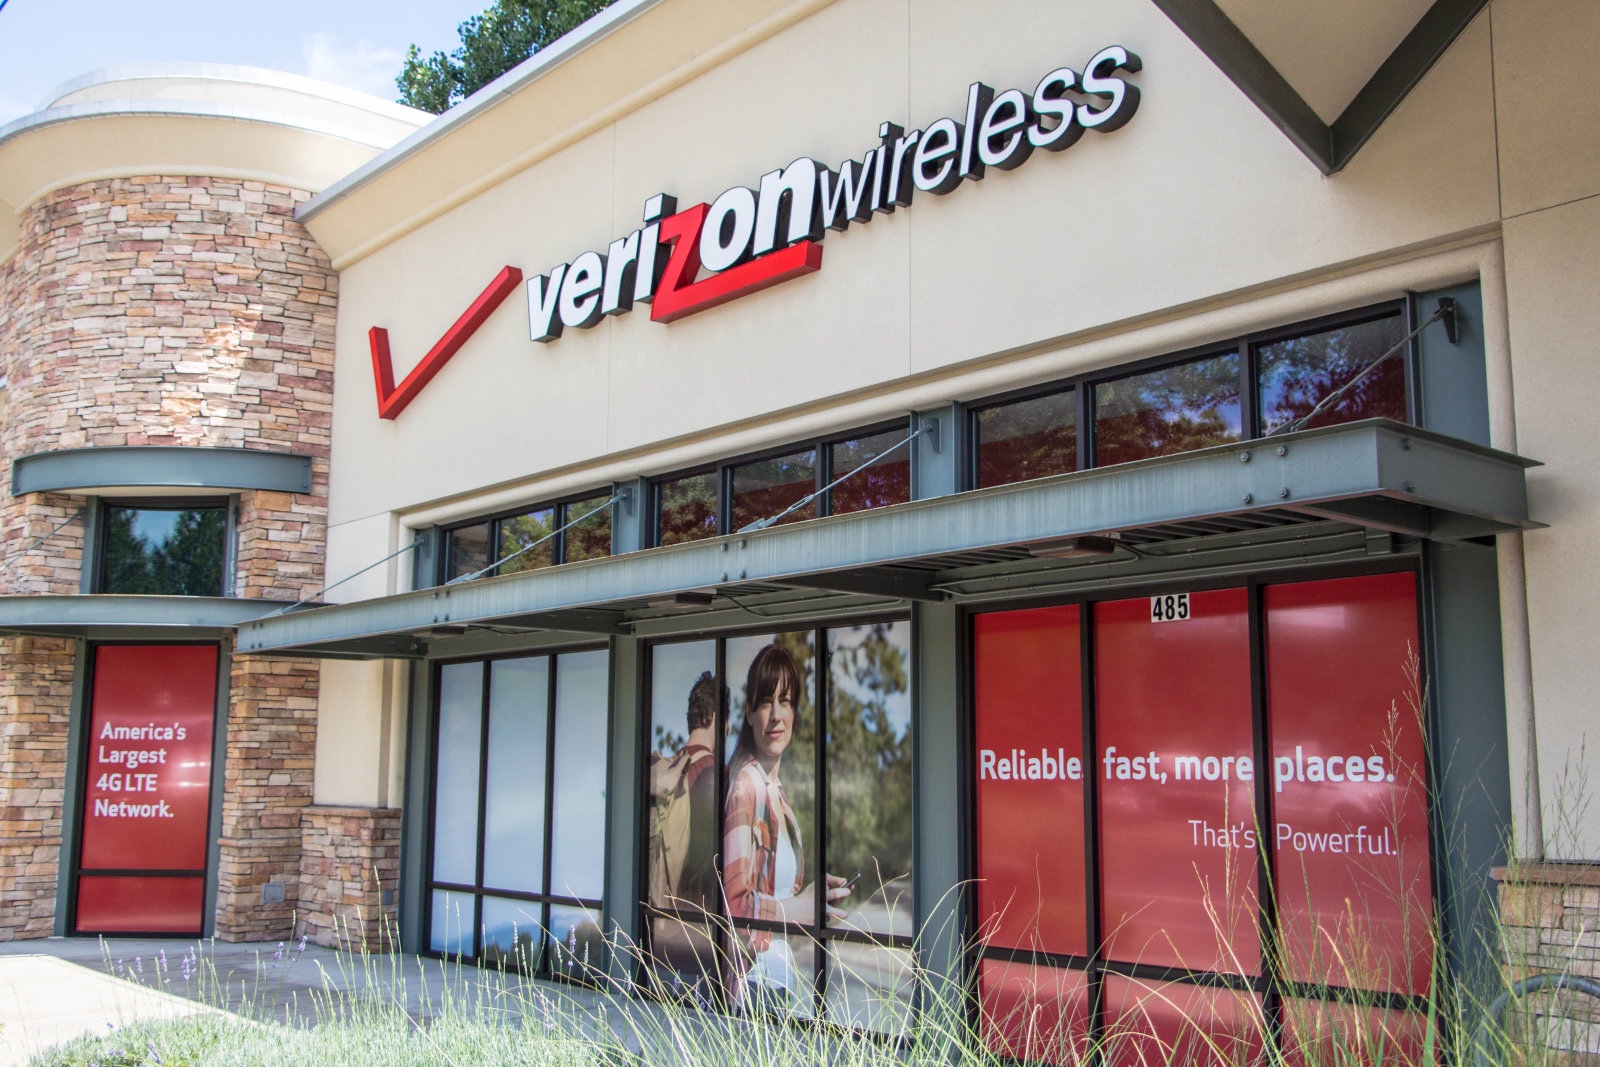 Eugene, Oregon, USA - July 8, 2014: Verizon Wireless Store location in Eugene, Oregon. Verizon sells cell phone services as well as cable across the United States with more than a 1000 locations.  This is a picture of Verizon's advertising on the side of the building as vehicles pass by.